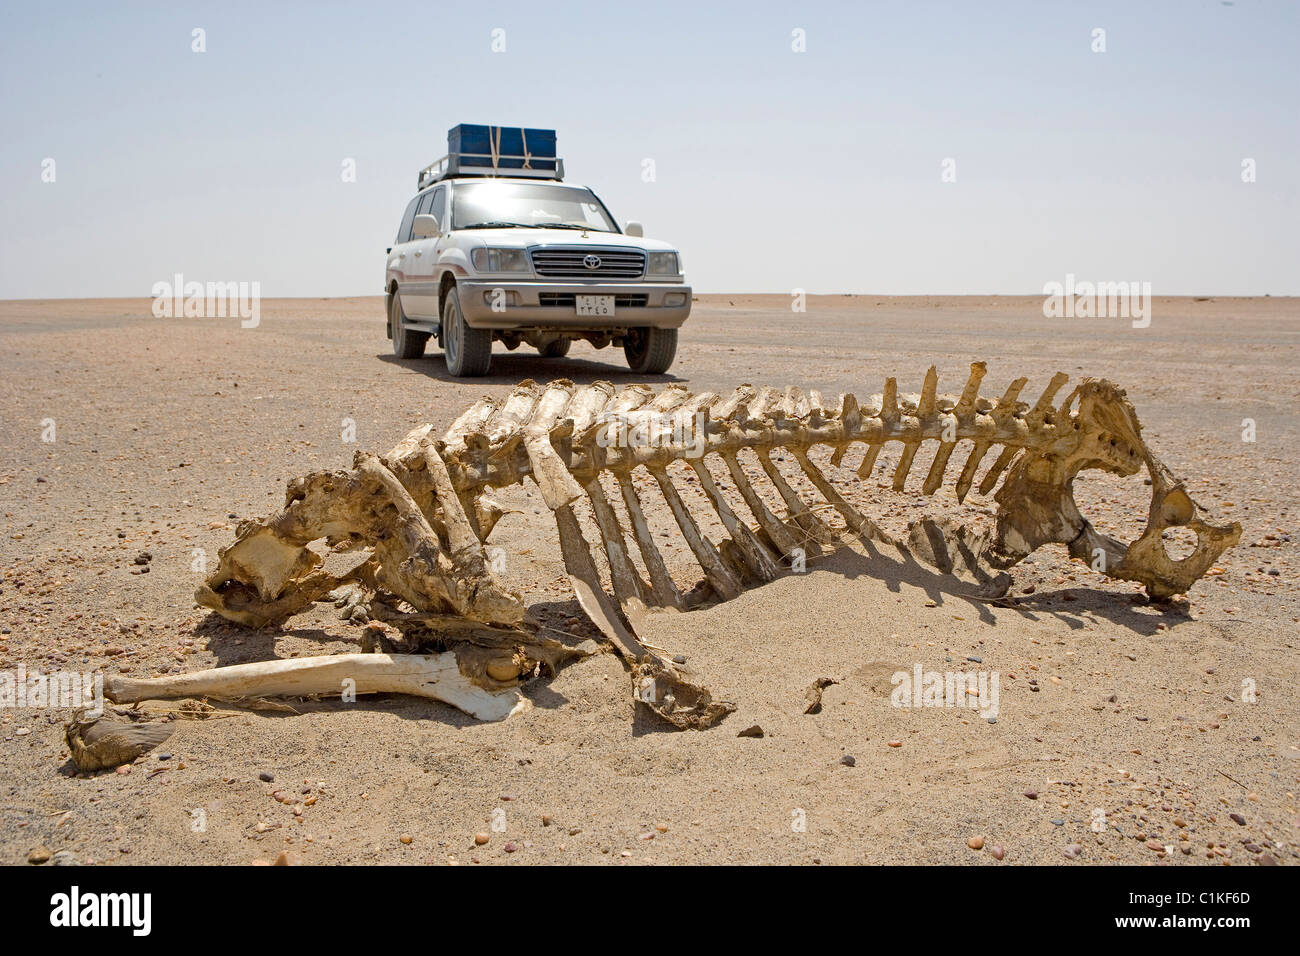 Sudan High Nubia Ash-Shamaliya province dead camels on the trail from Dongola to Soleib through the nubian desert (eastern Stock Photo